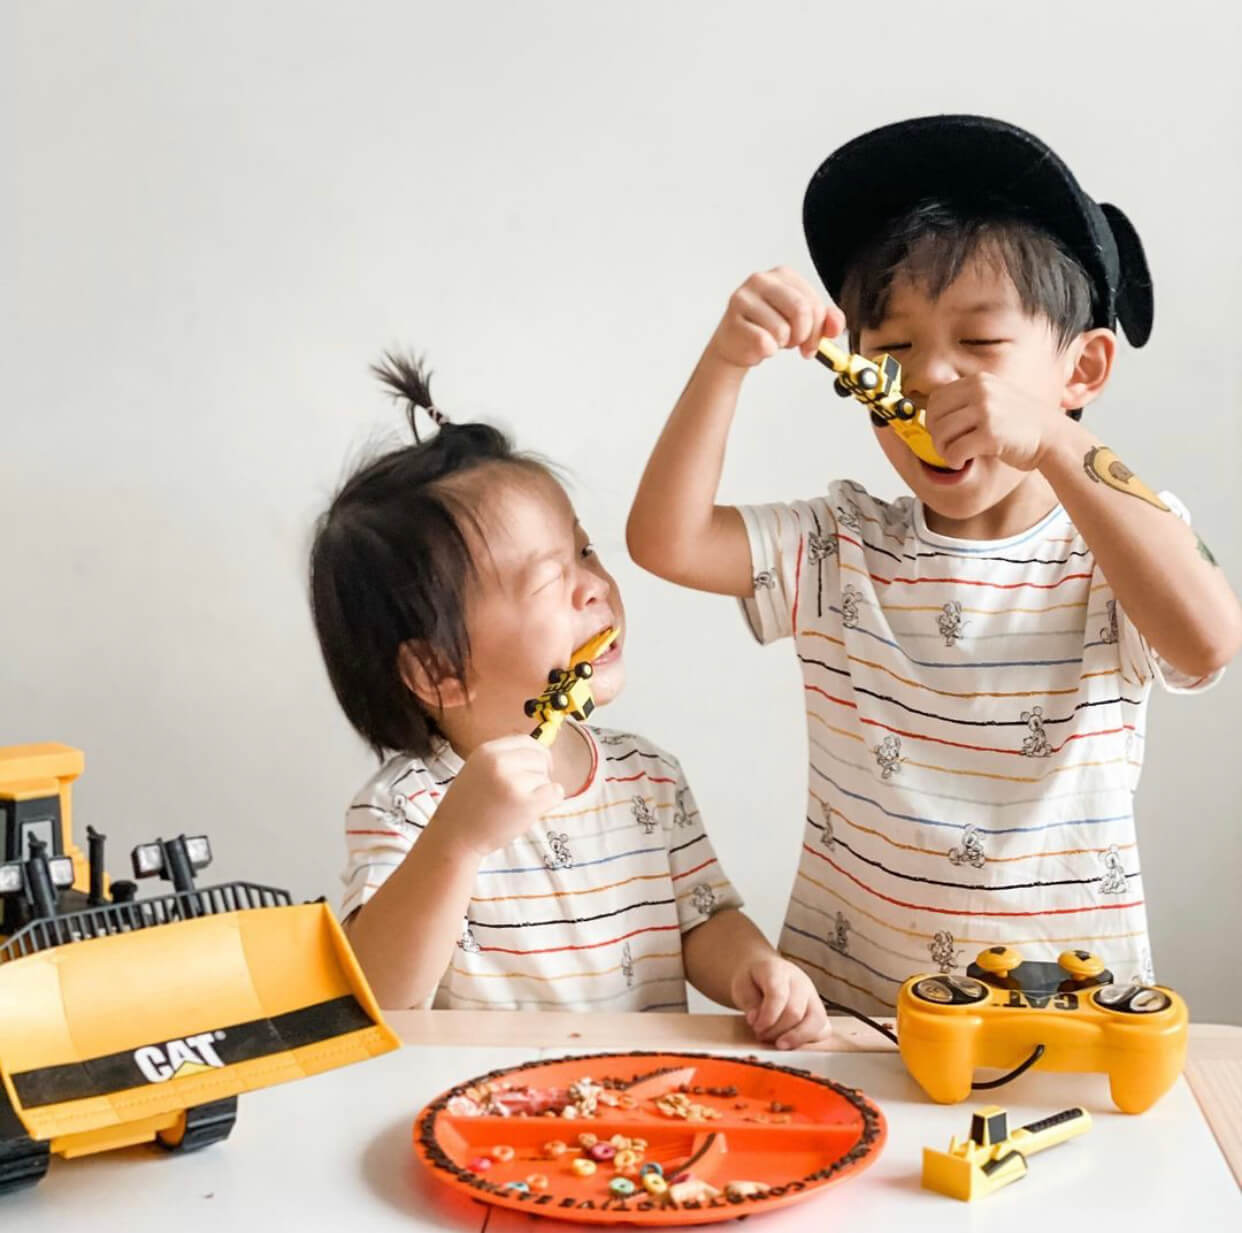 kids enjoying their meal off a construction themed plate